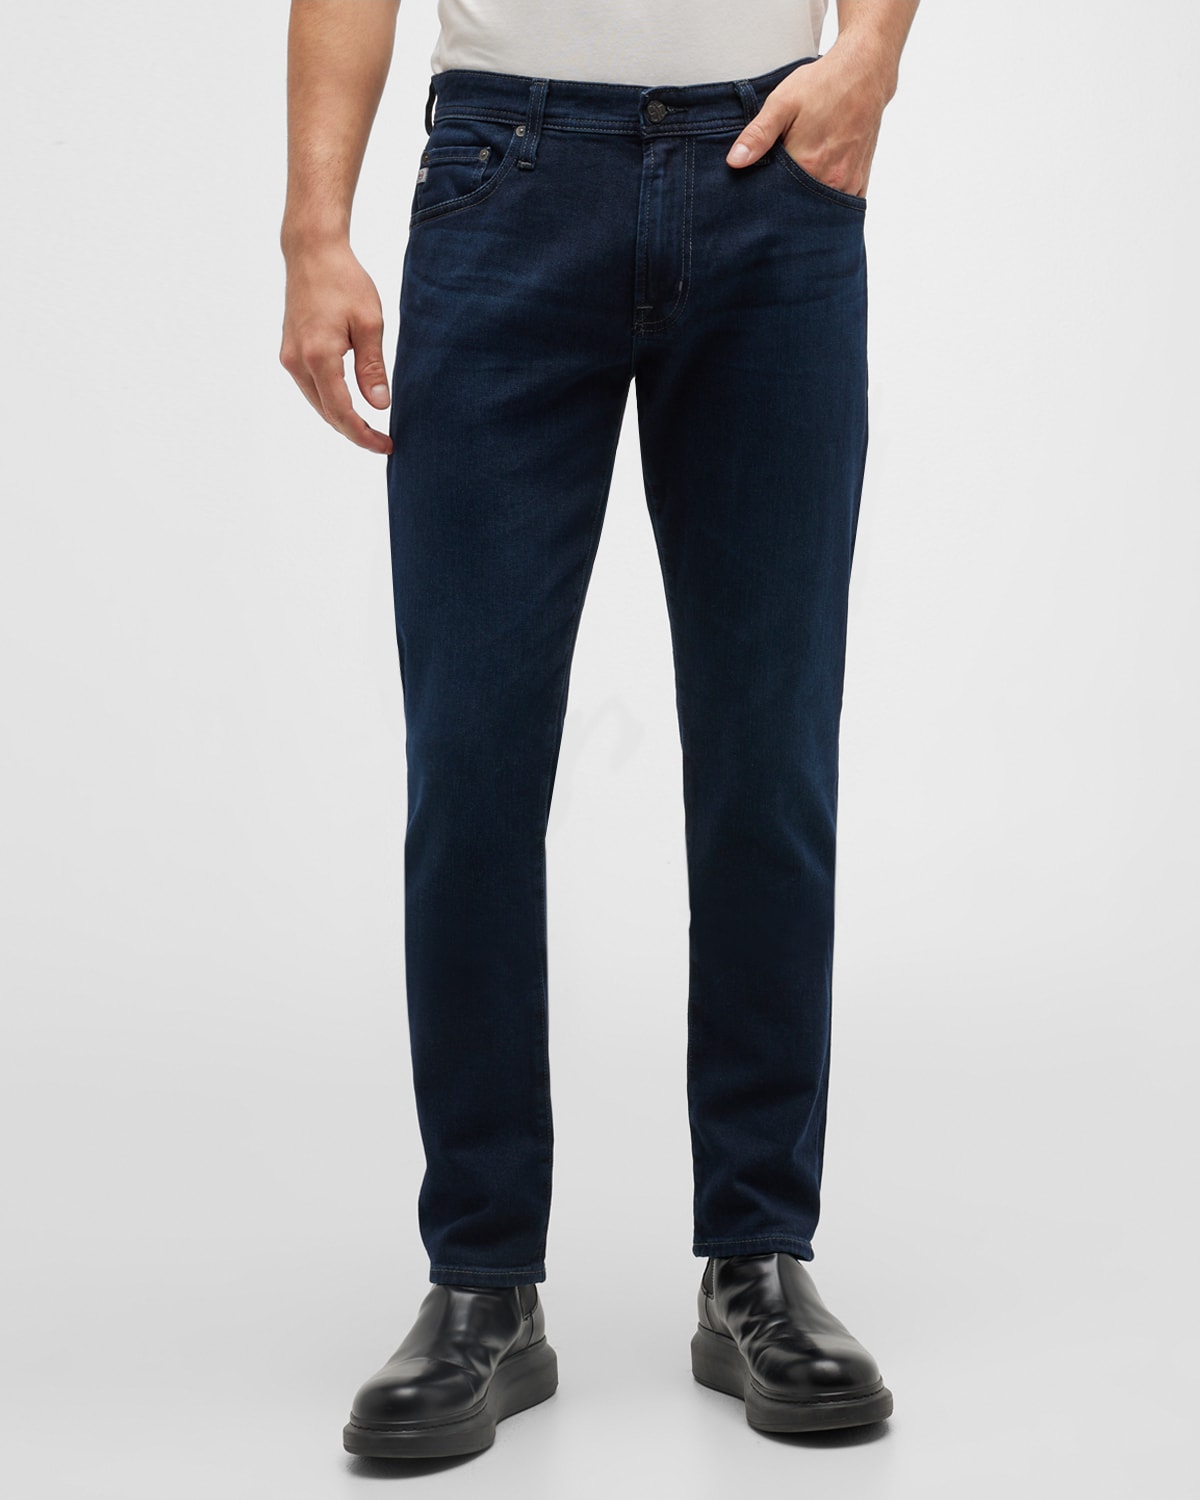 AG Adriano Goldschmied Men's Tellis Tapered Stretch Jeans